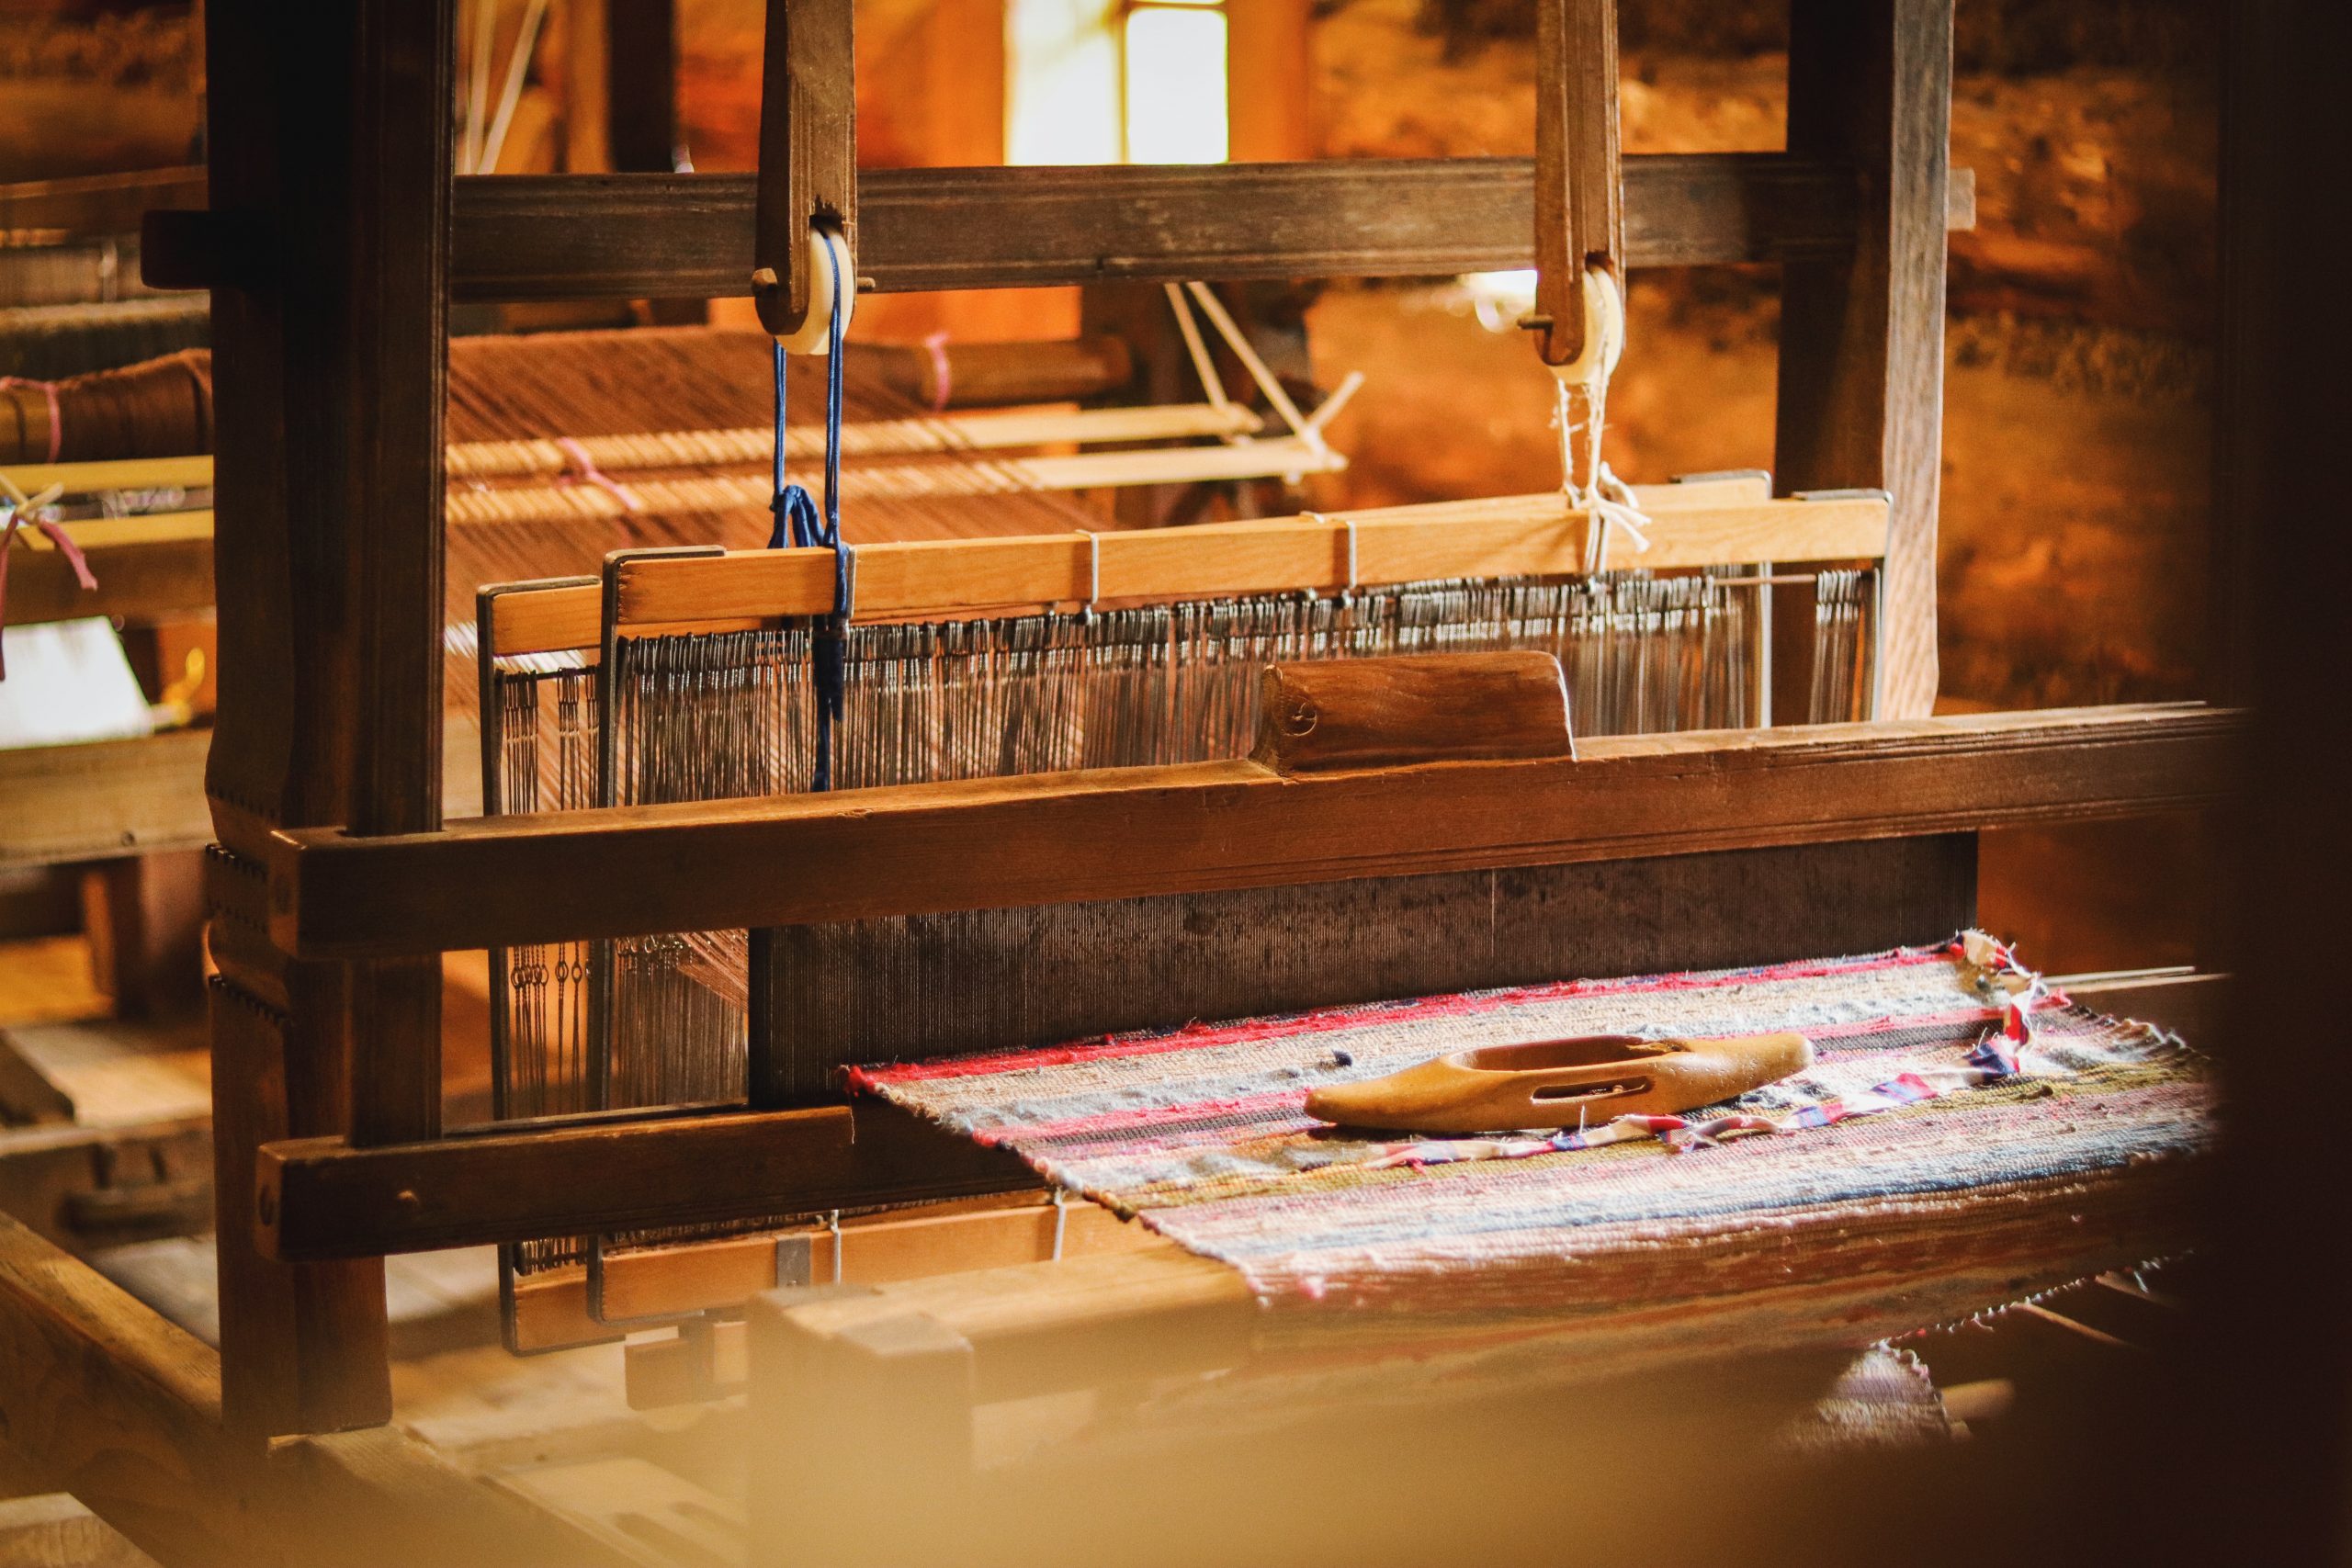 Authentic hand weaving is still a wonderful tradition for making hand made carpets in Romania